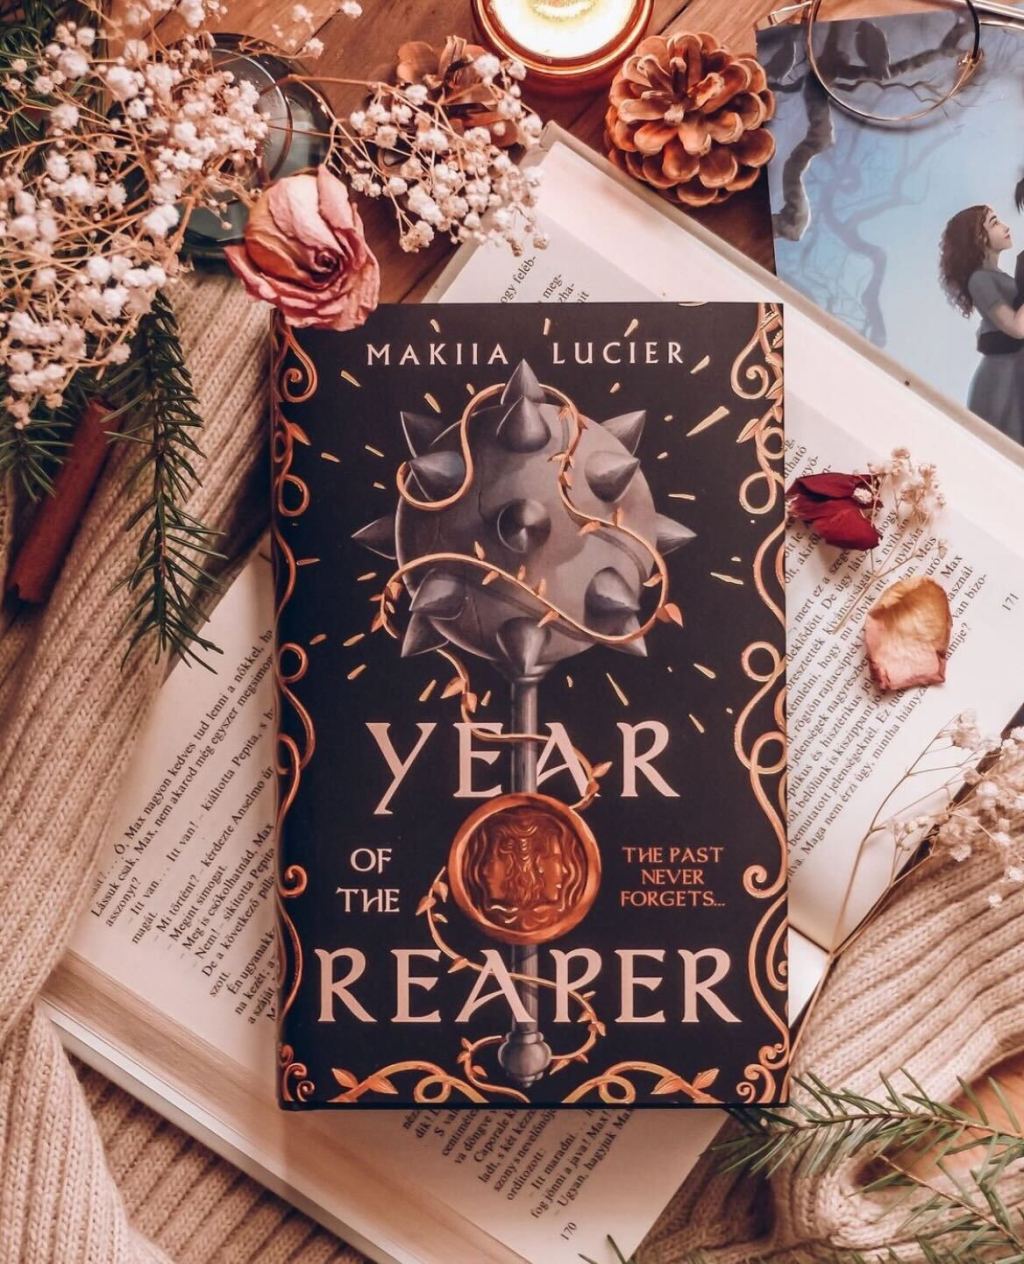 Year of the Reaper Readalong Day 2!